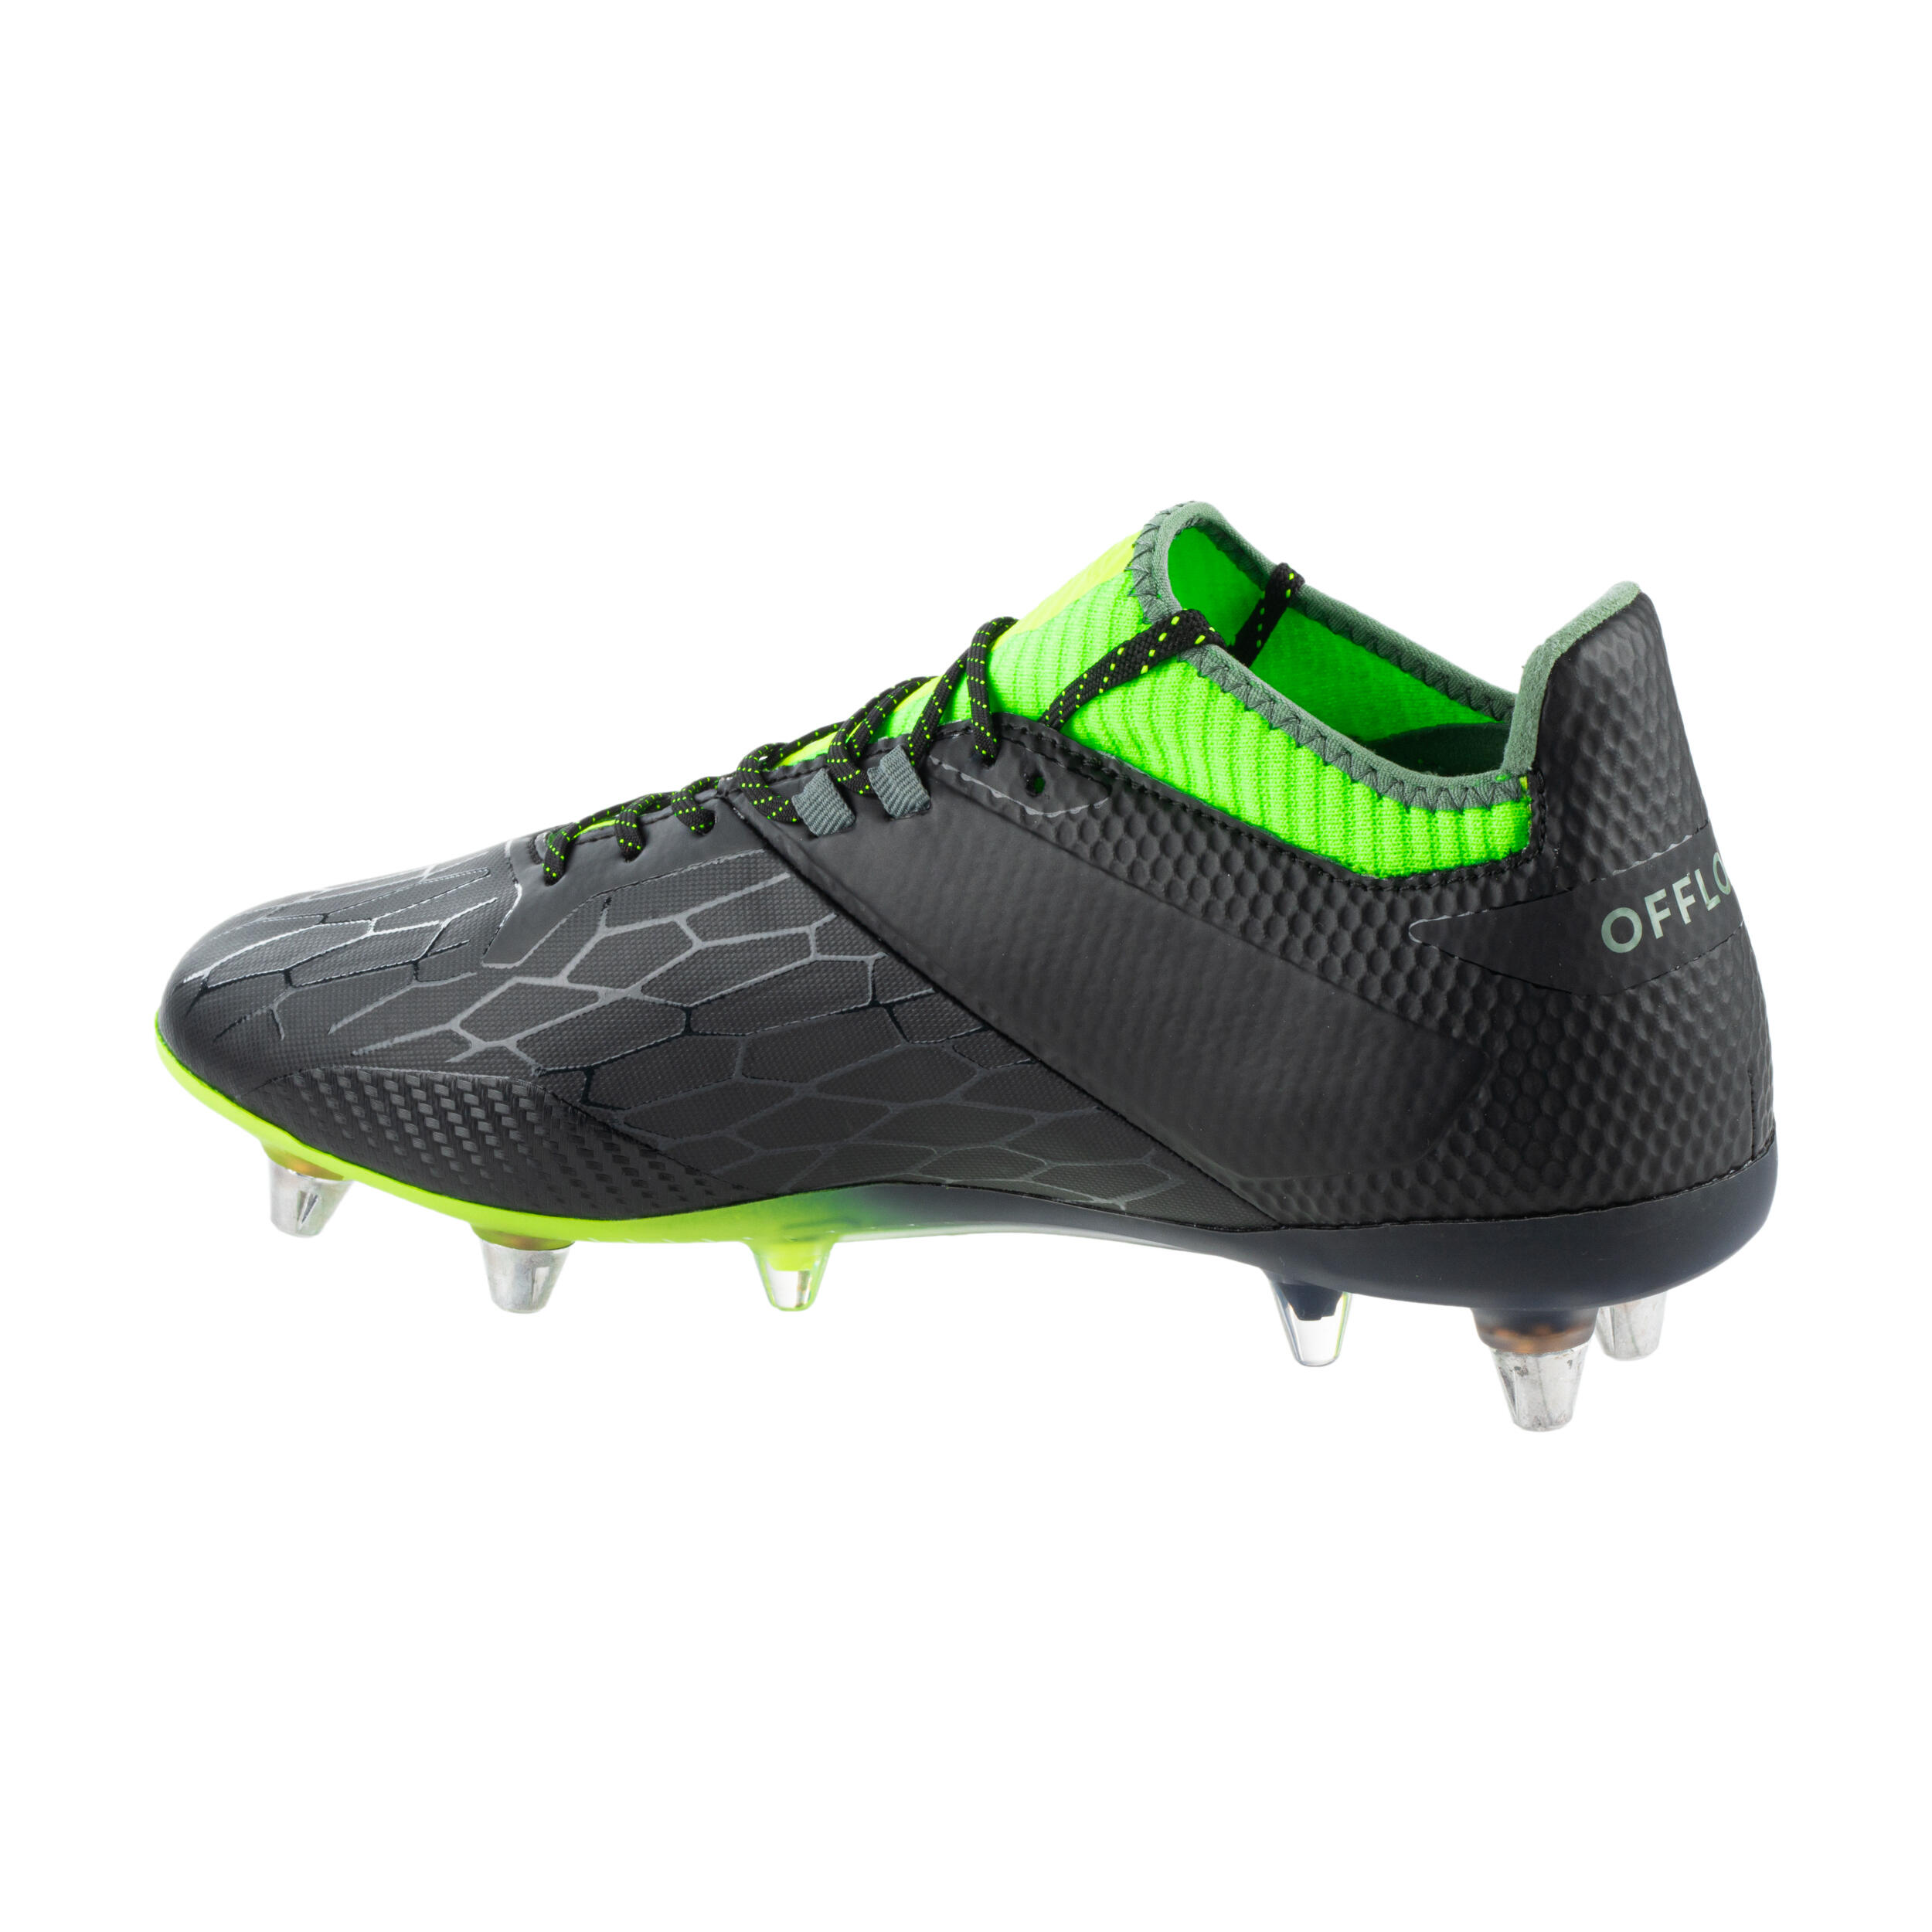 Adult Screw-In Hybrid Rugby Boots Advance R900 SG - Black/Yellow 9/14